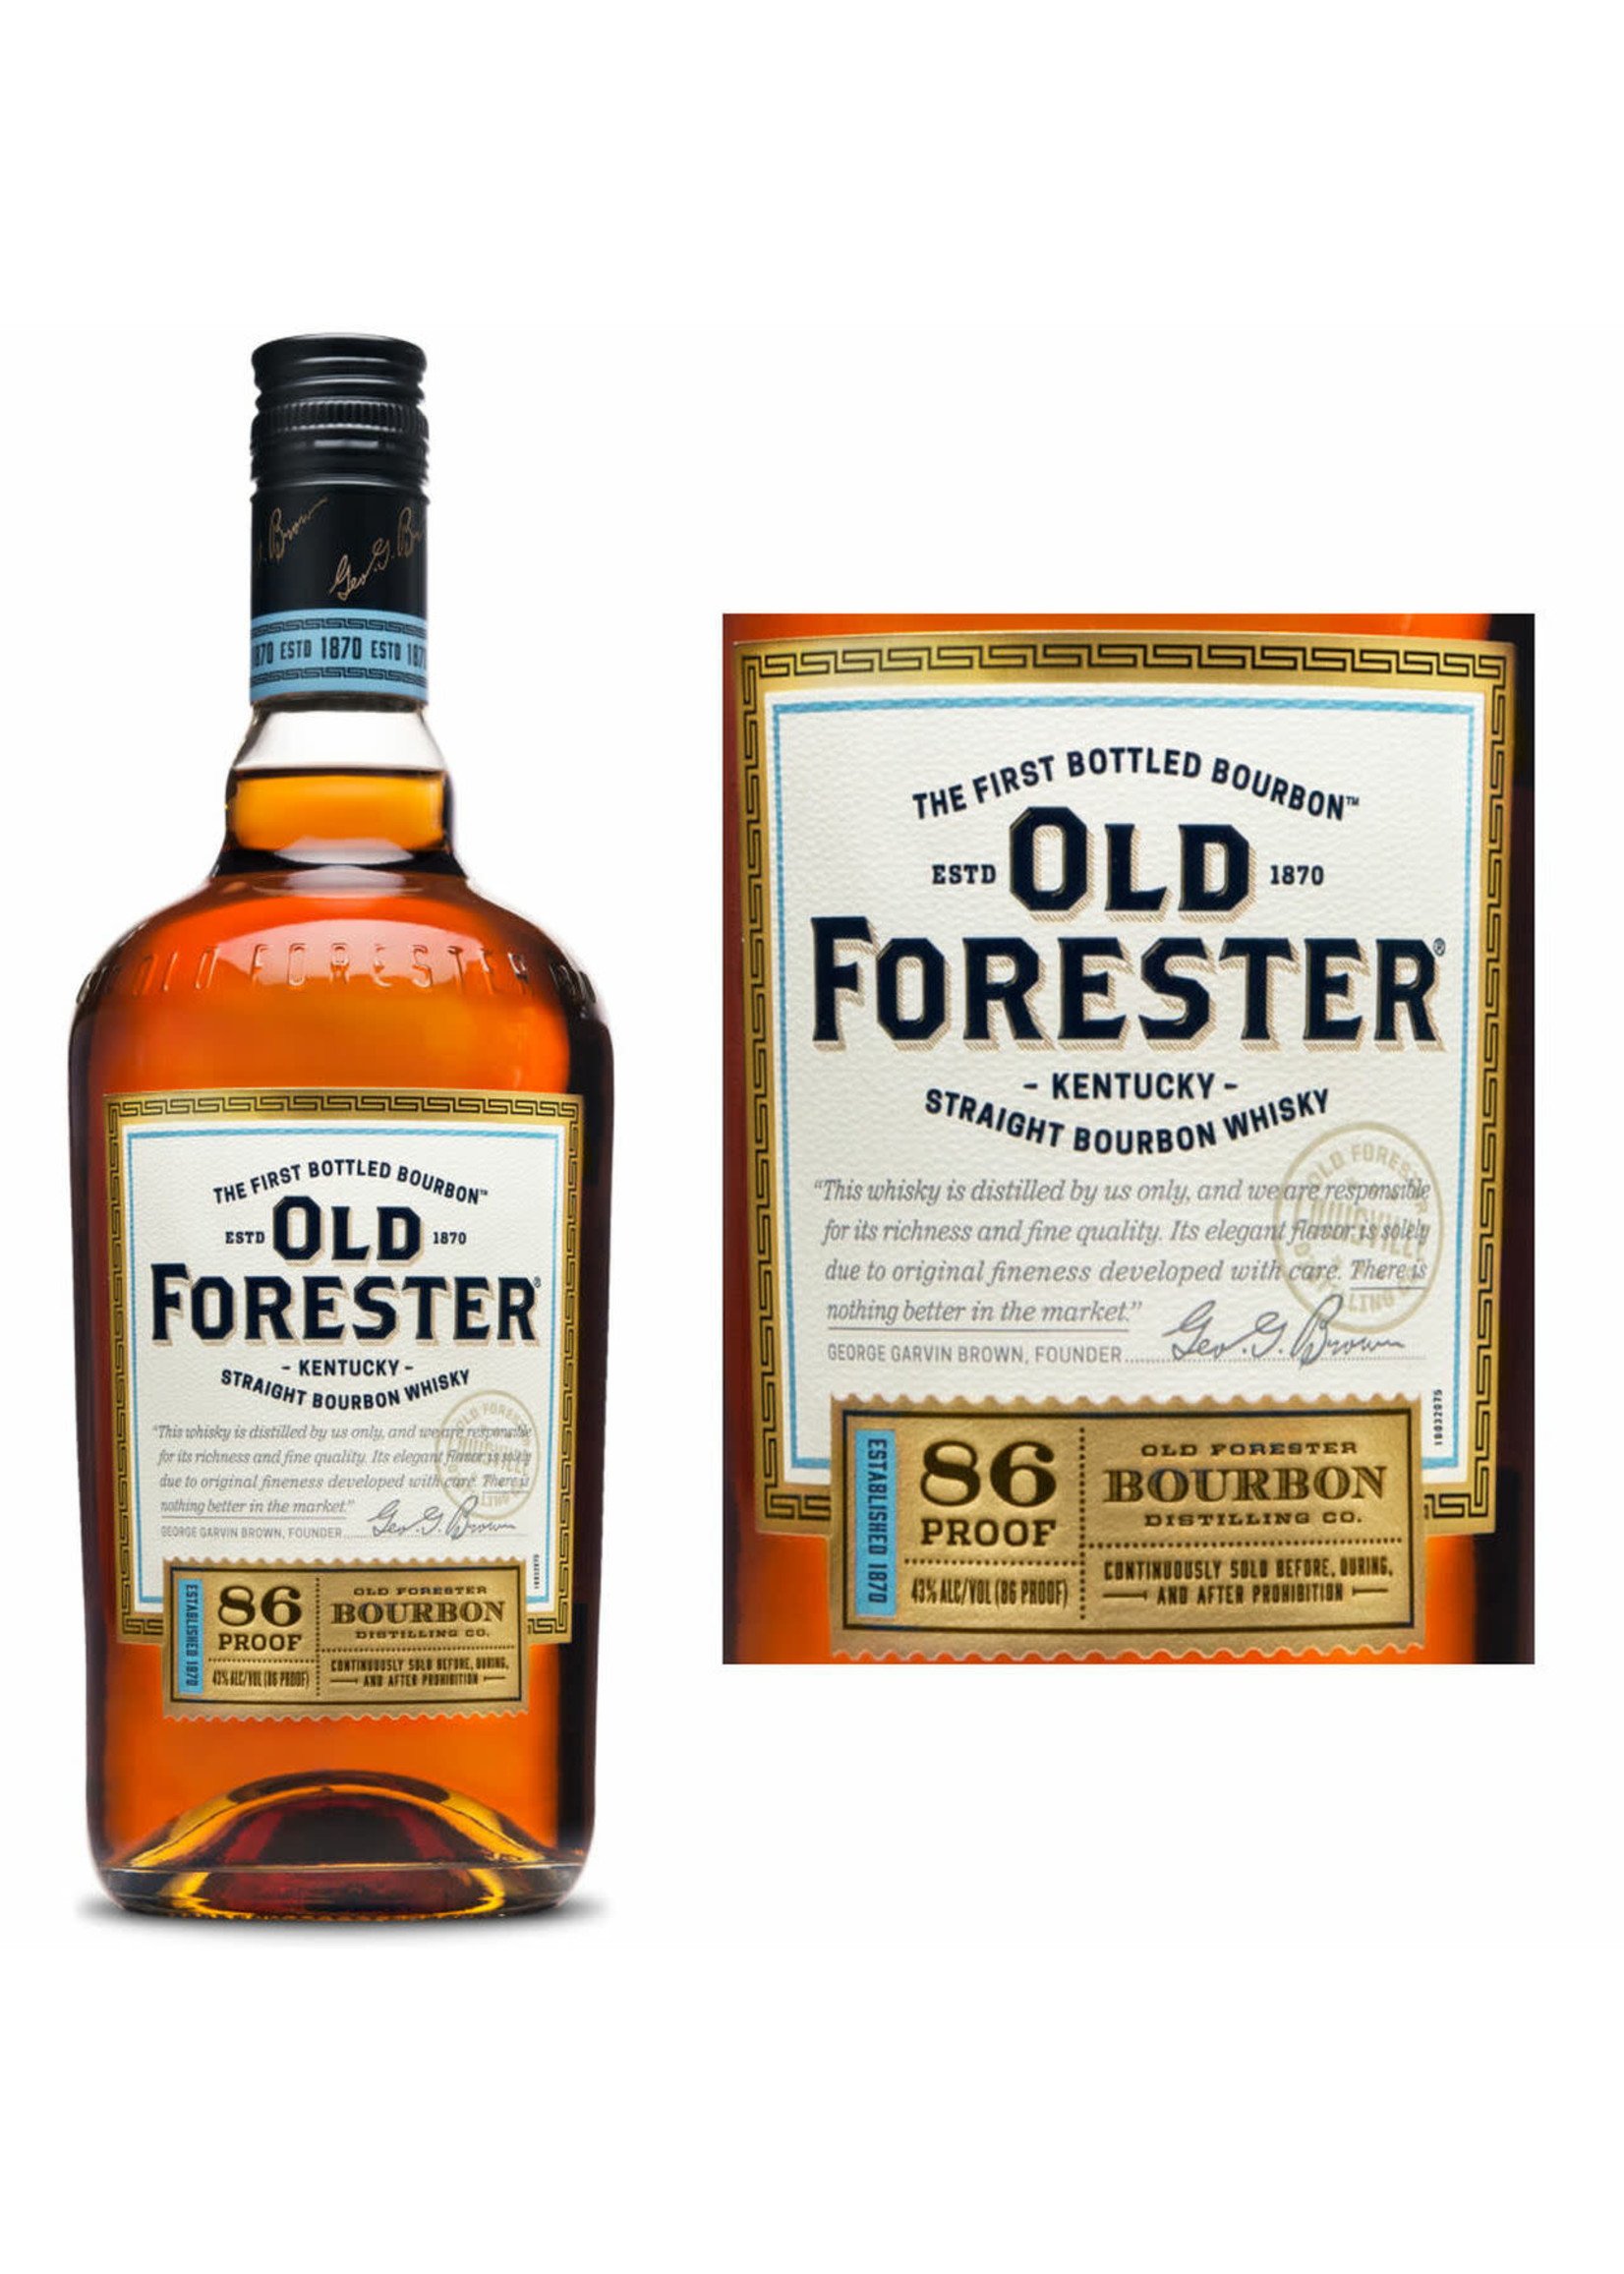 OLD FORESTER OLD FORESTER	KENTUCKY BOURBON 86PF	.750L